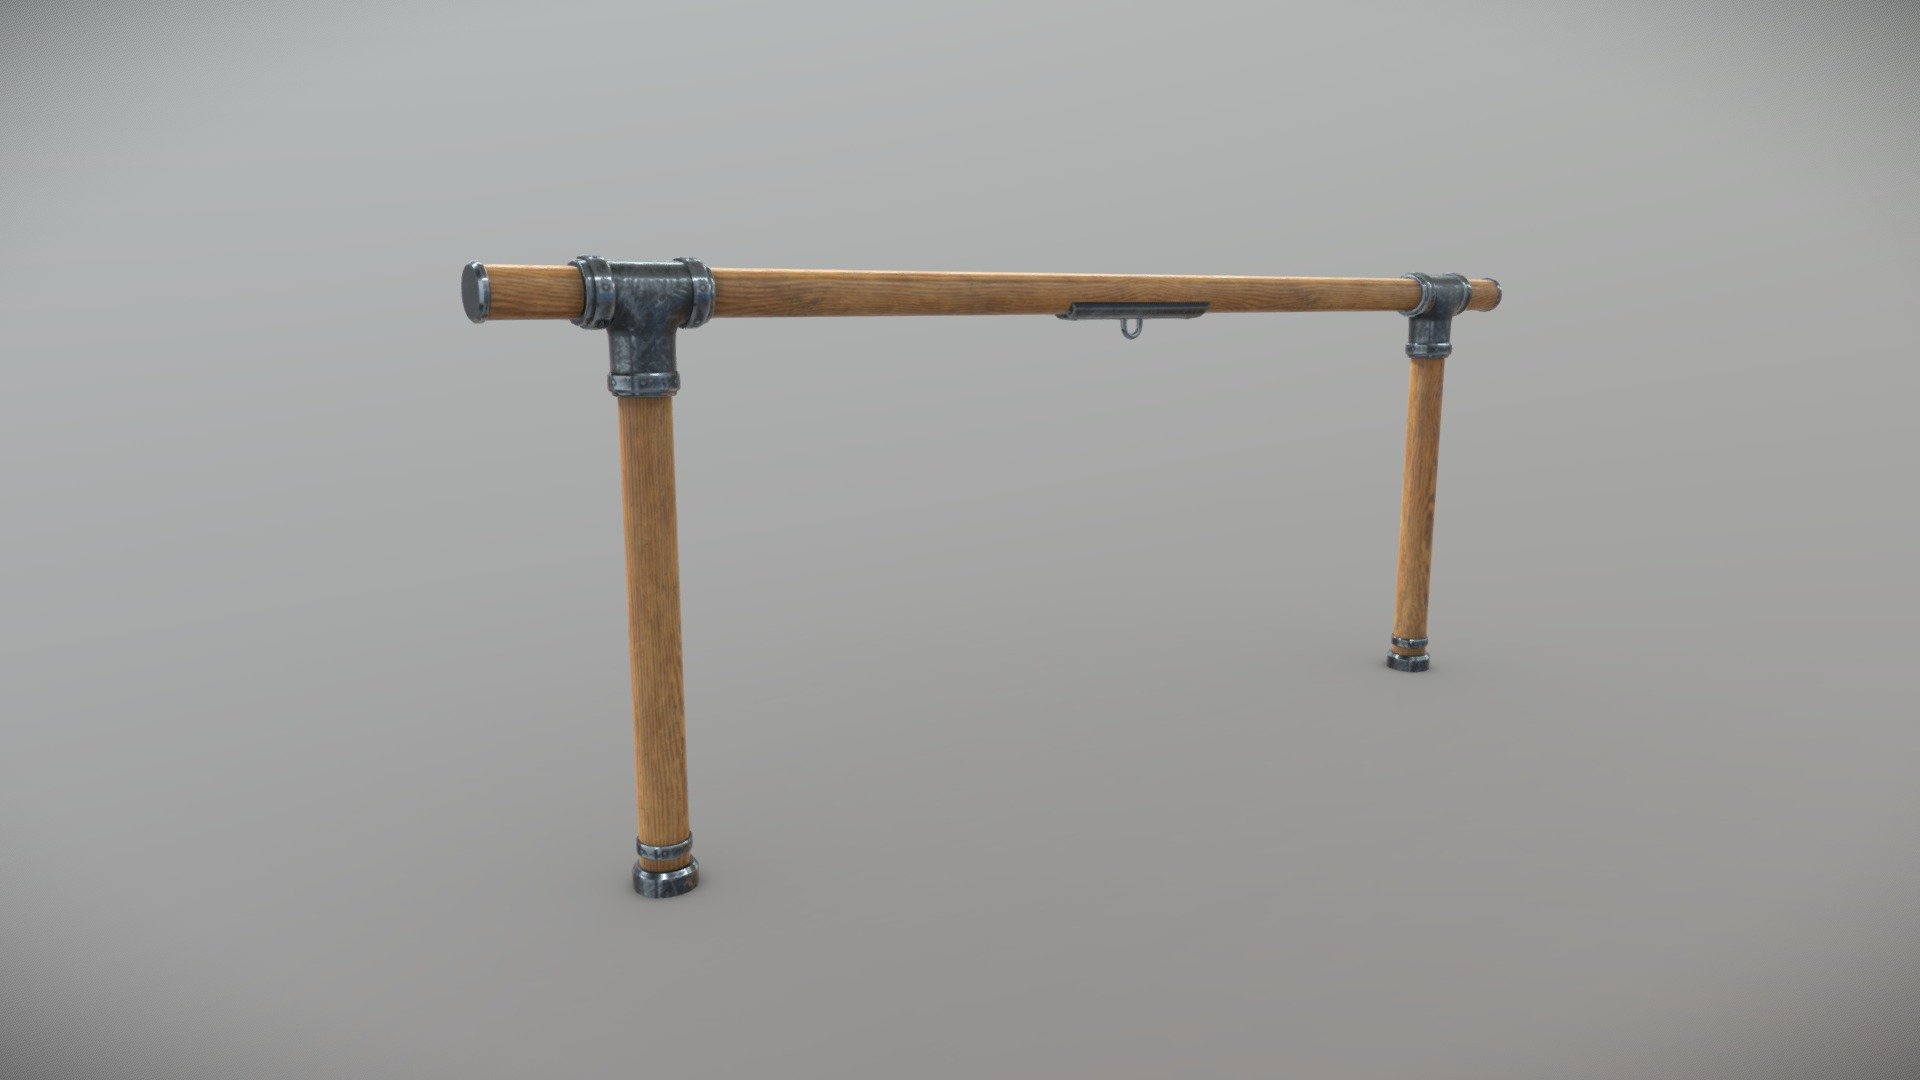 Wooden binding poles

I made it in Blender 3.0 and textured it in Substance Painter. 

2x PBR 2048x2048 material slots used 3d model